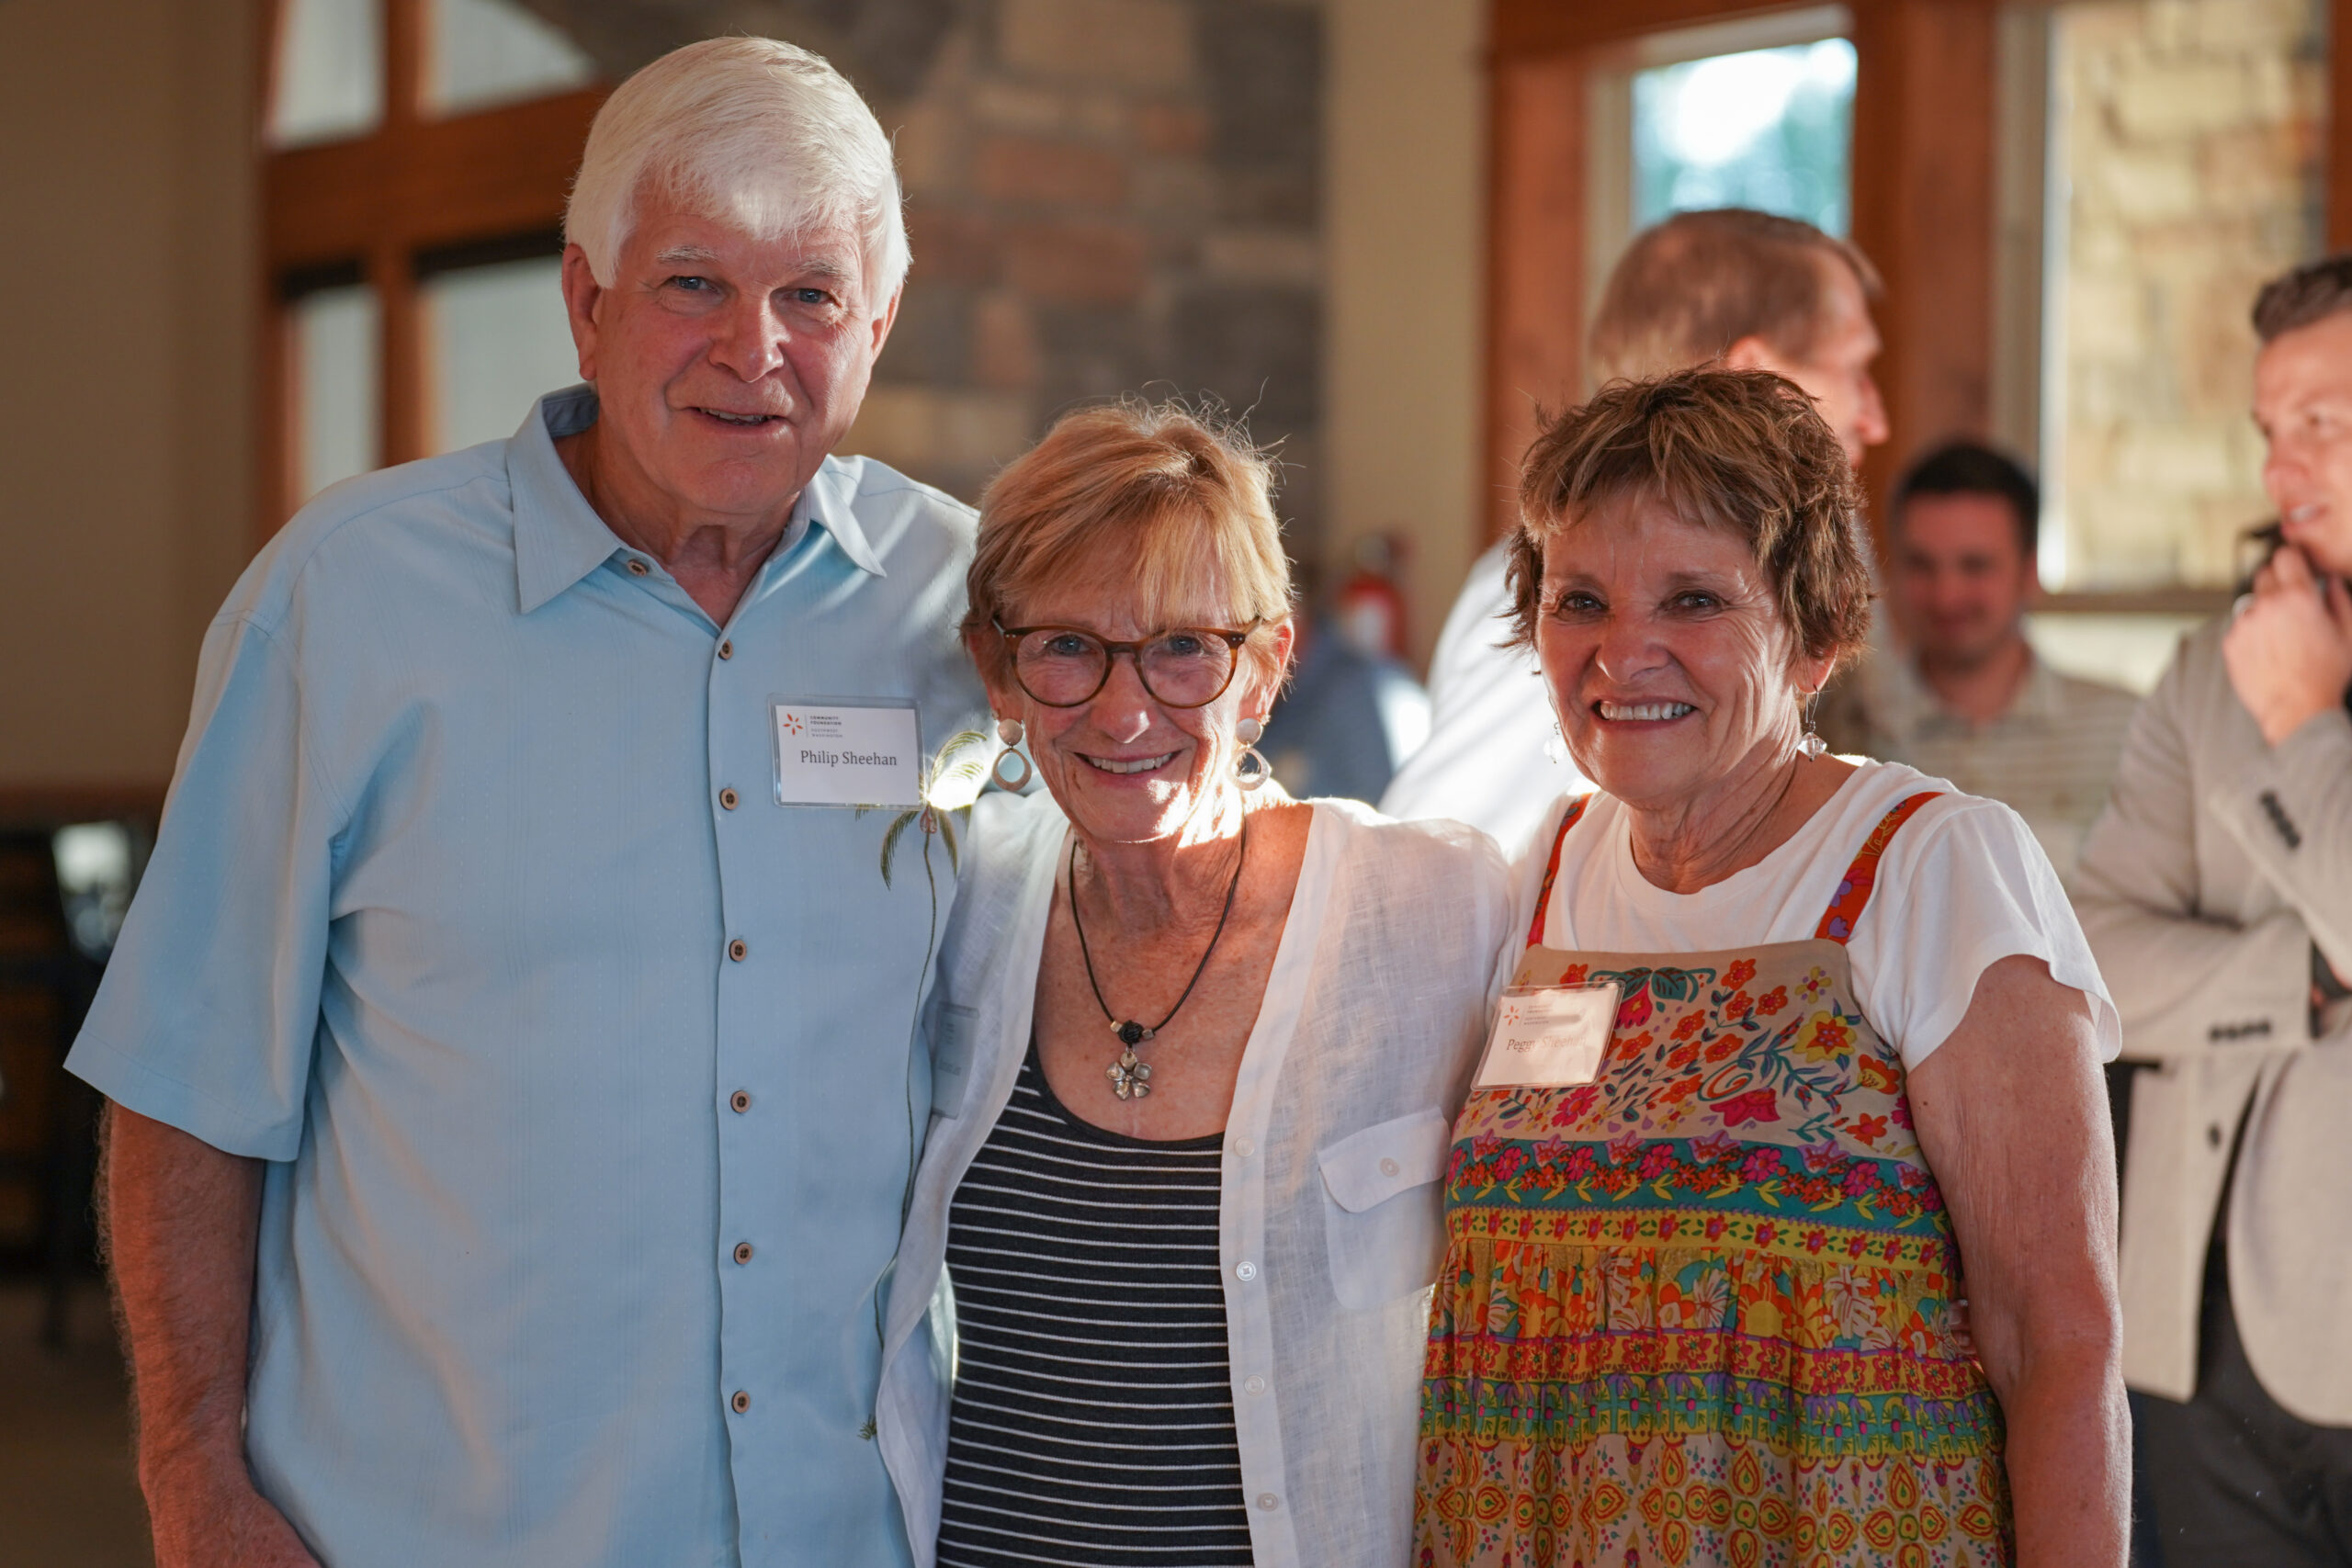 Three donors pose and smile into the camera during our annual supporter appreciation event.